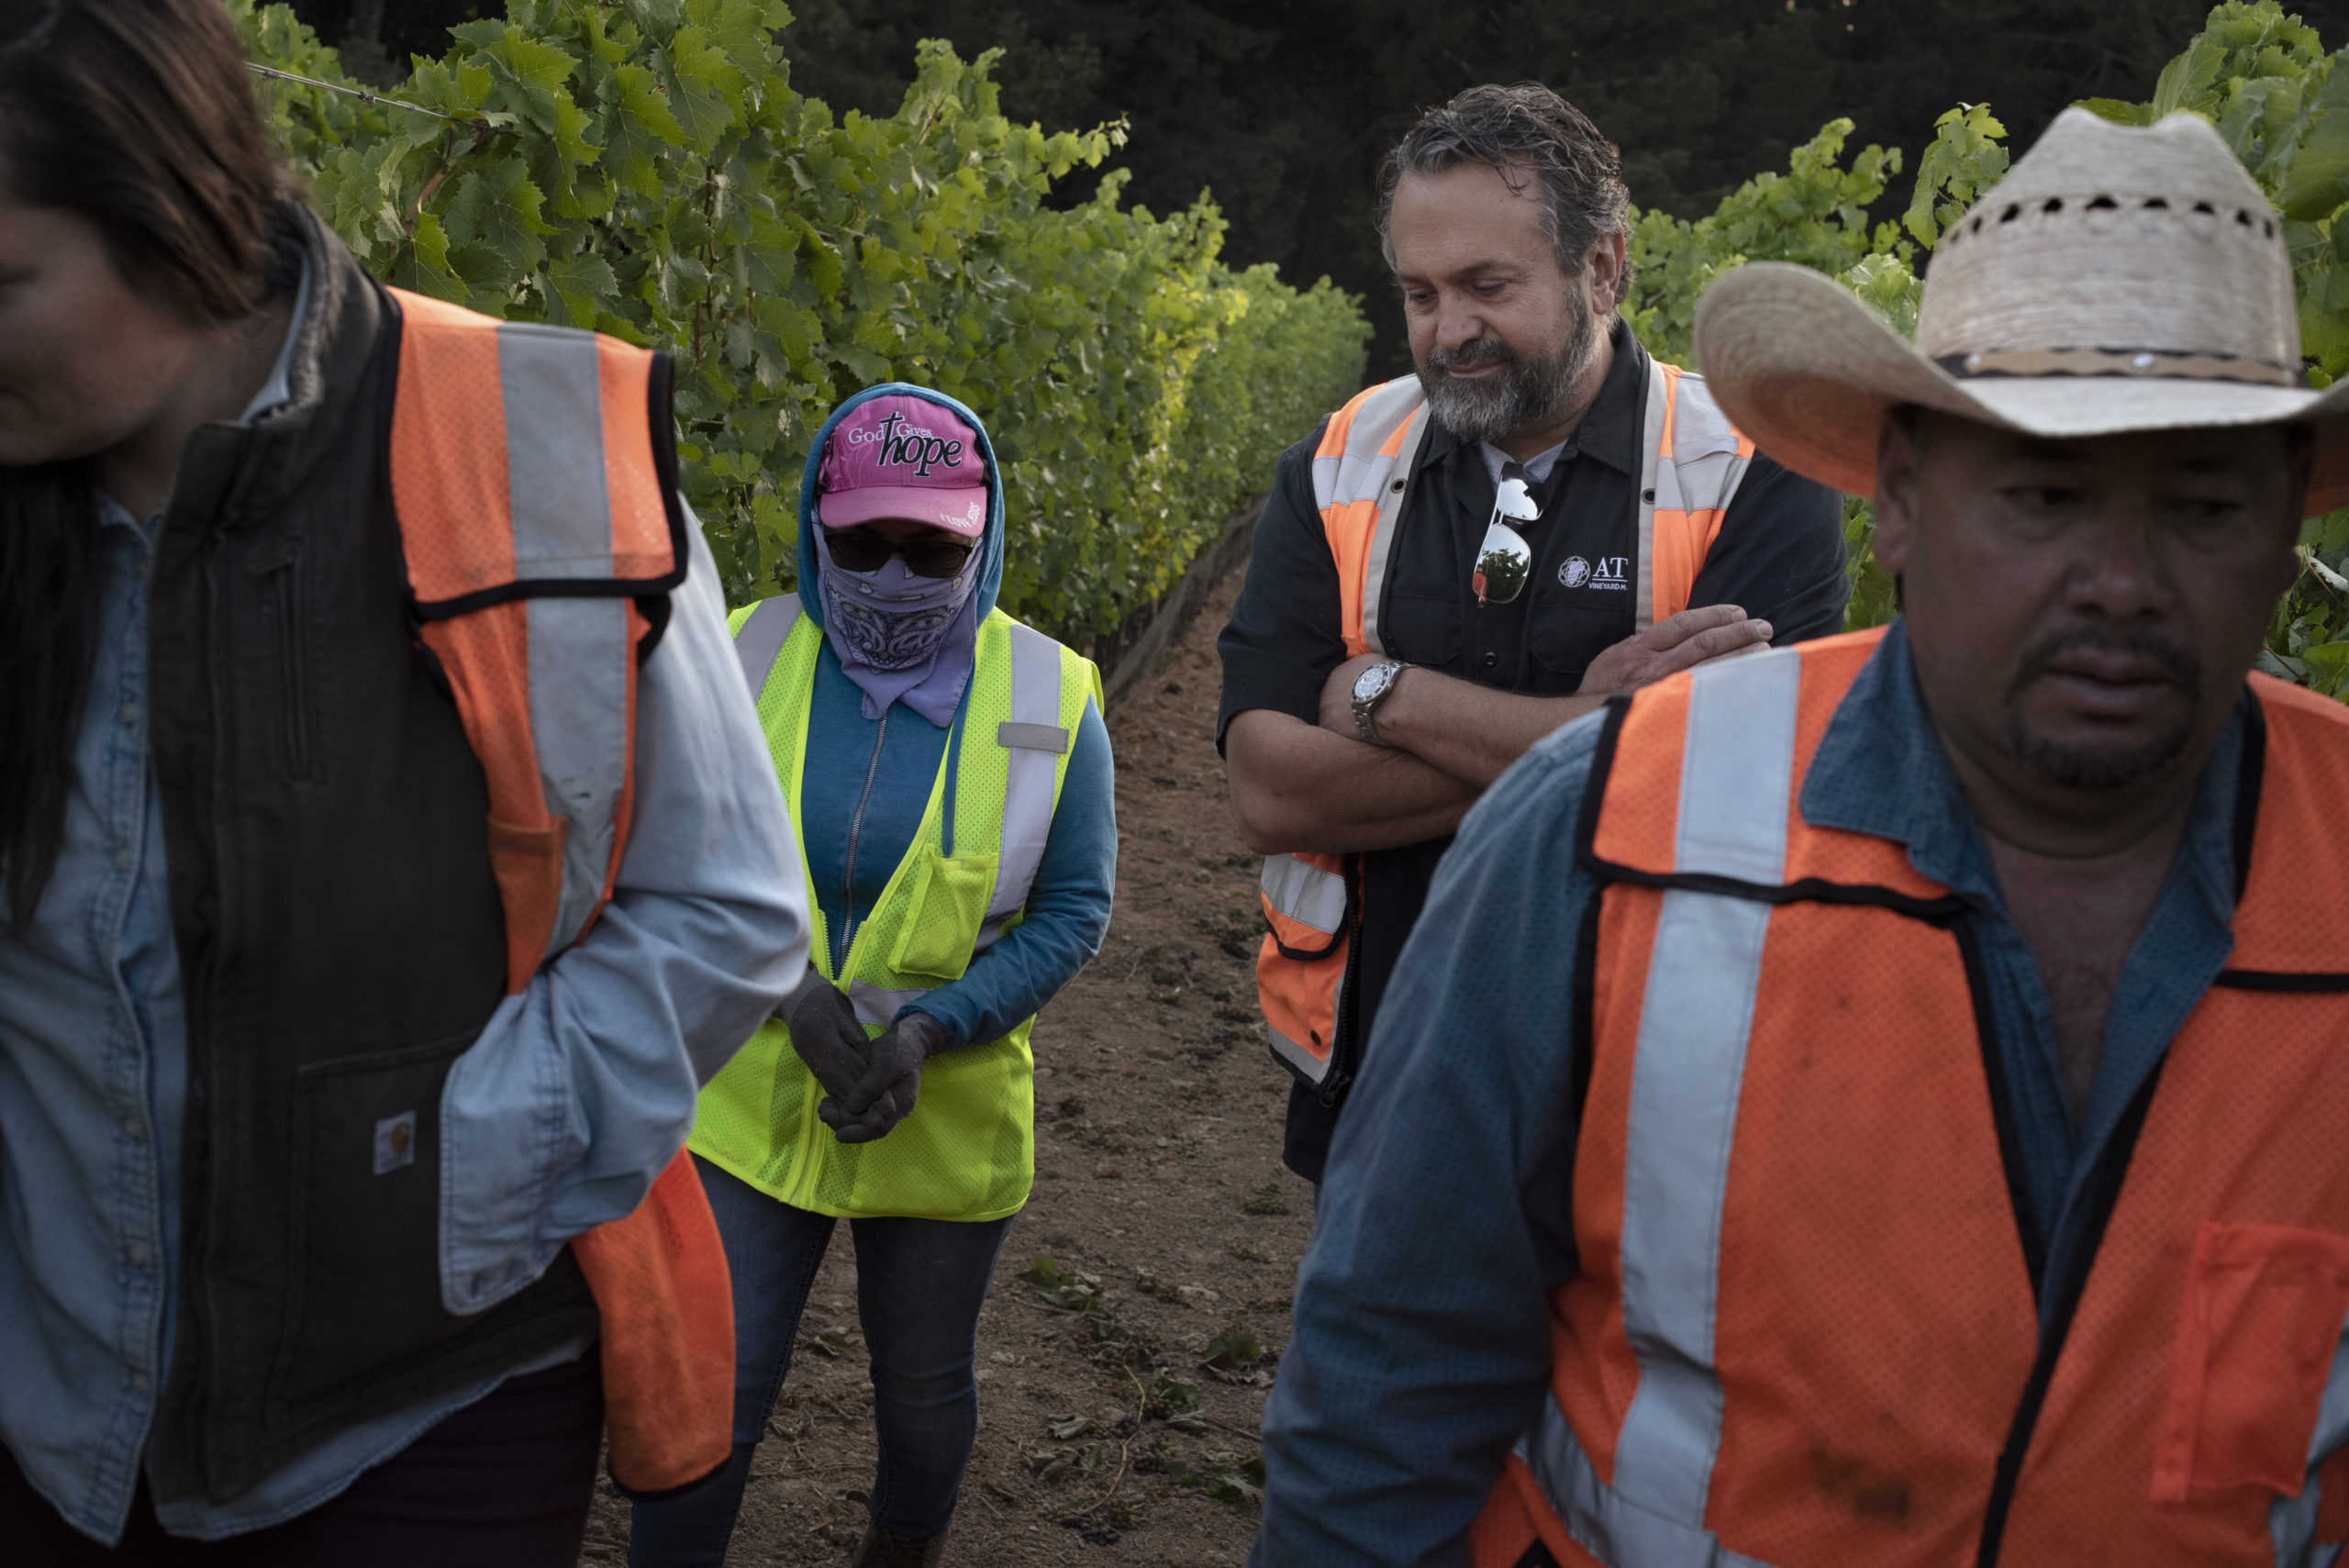 Tony Bugica, 2nd from right, director of farming and business development of Atlas Vineyard Management, checking in with crew member Maria Menara, 2nd from left, with Assistant Vineyard Manager Fermin Manzo, far right, and Assistant Director Kelly Cybulski at Cohn Vineyard in Healdsburg, California. July 23, 2021. (Photo: Erik Castro/for Sonoma Magazine)